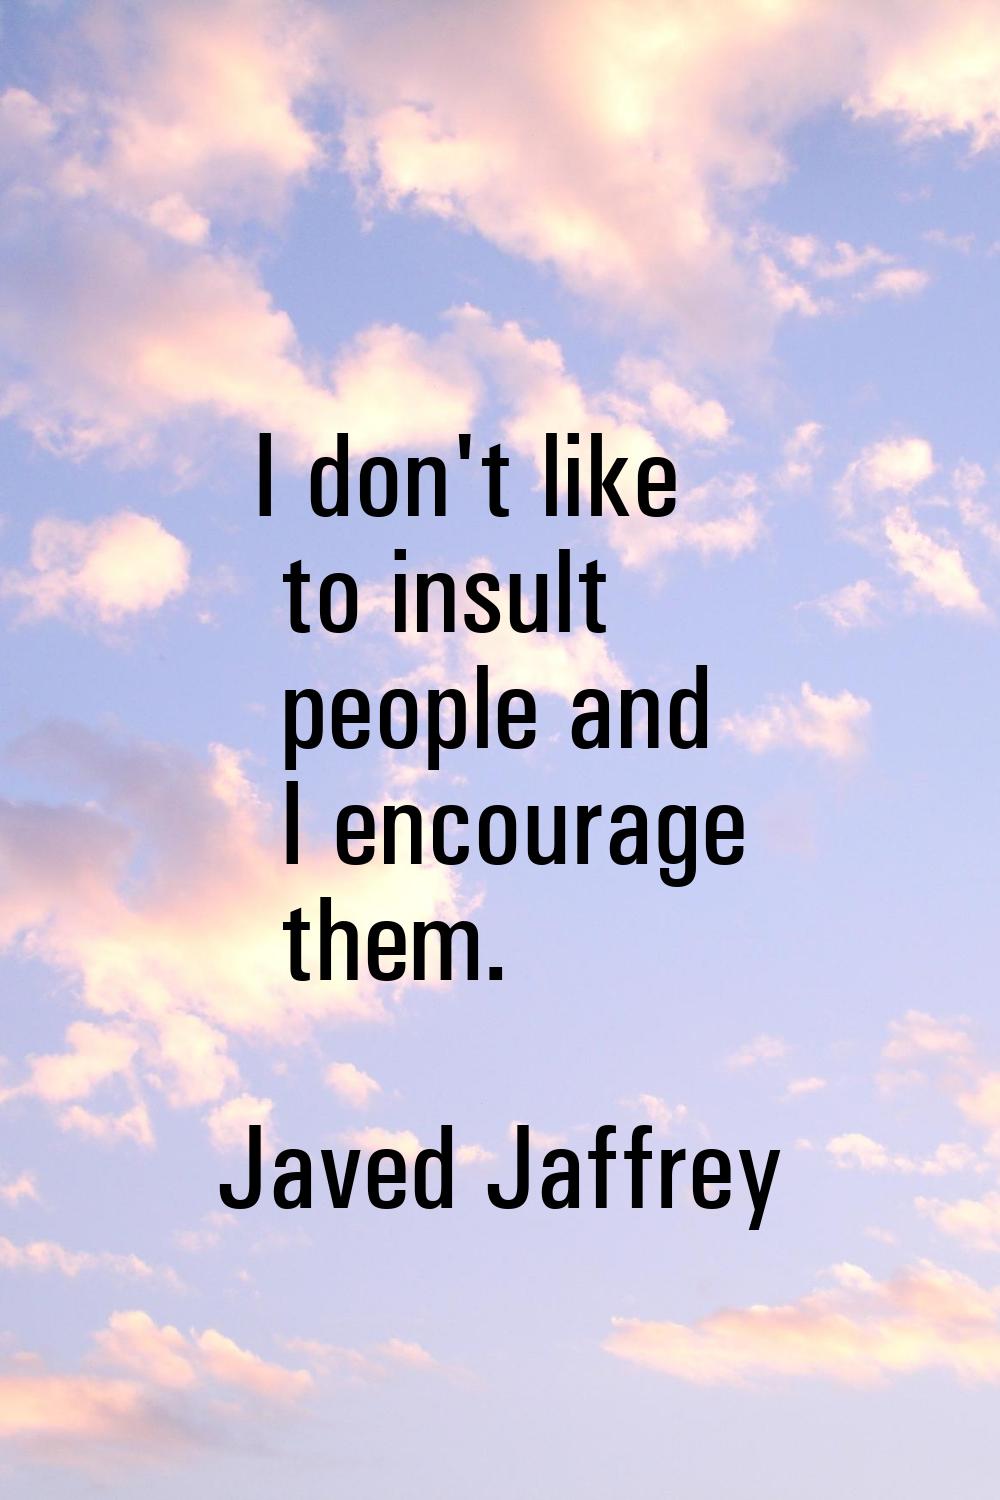 I don't like to insult people and I encourage them.